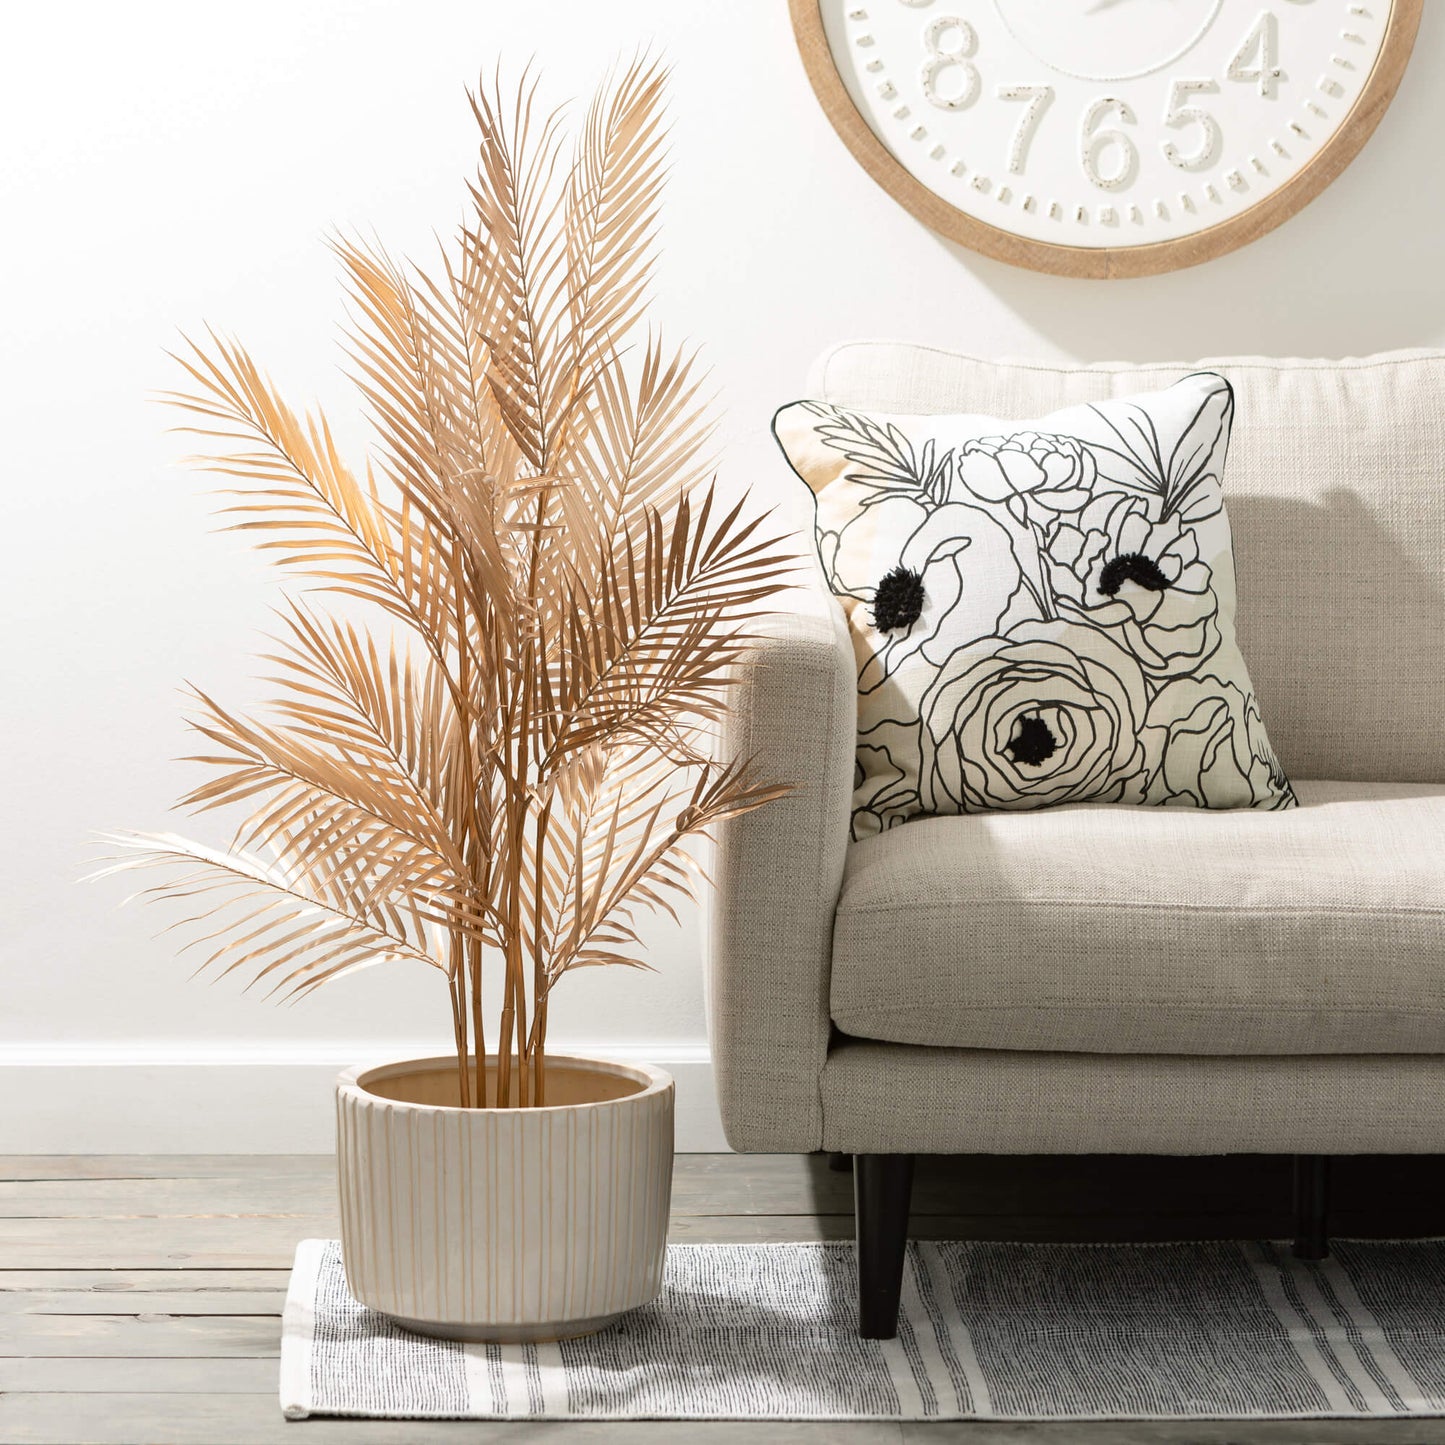 large planter with a palm in it set on the floor next to a couch.